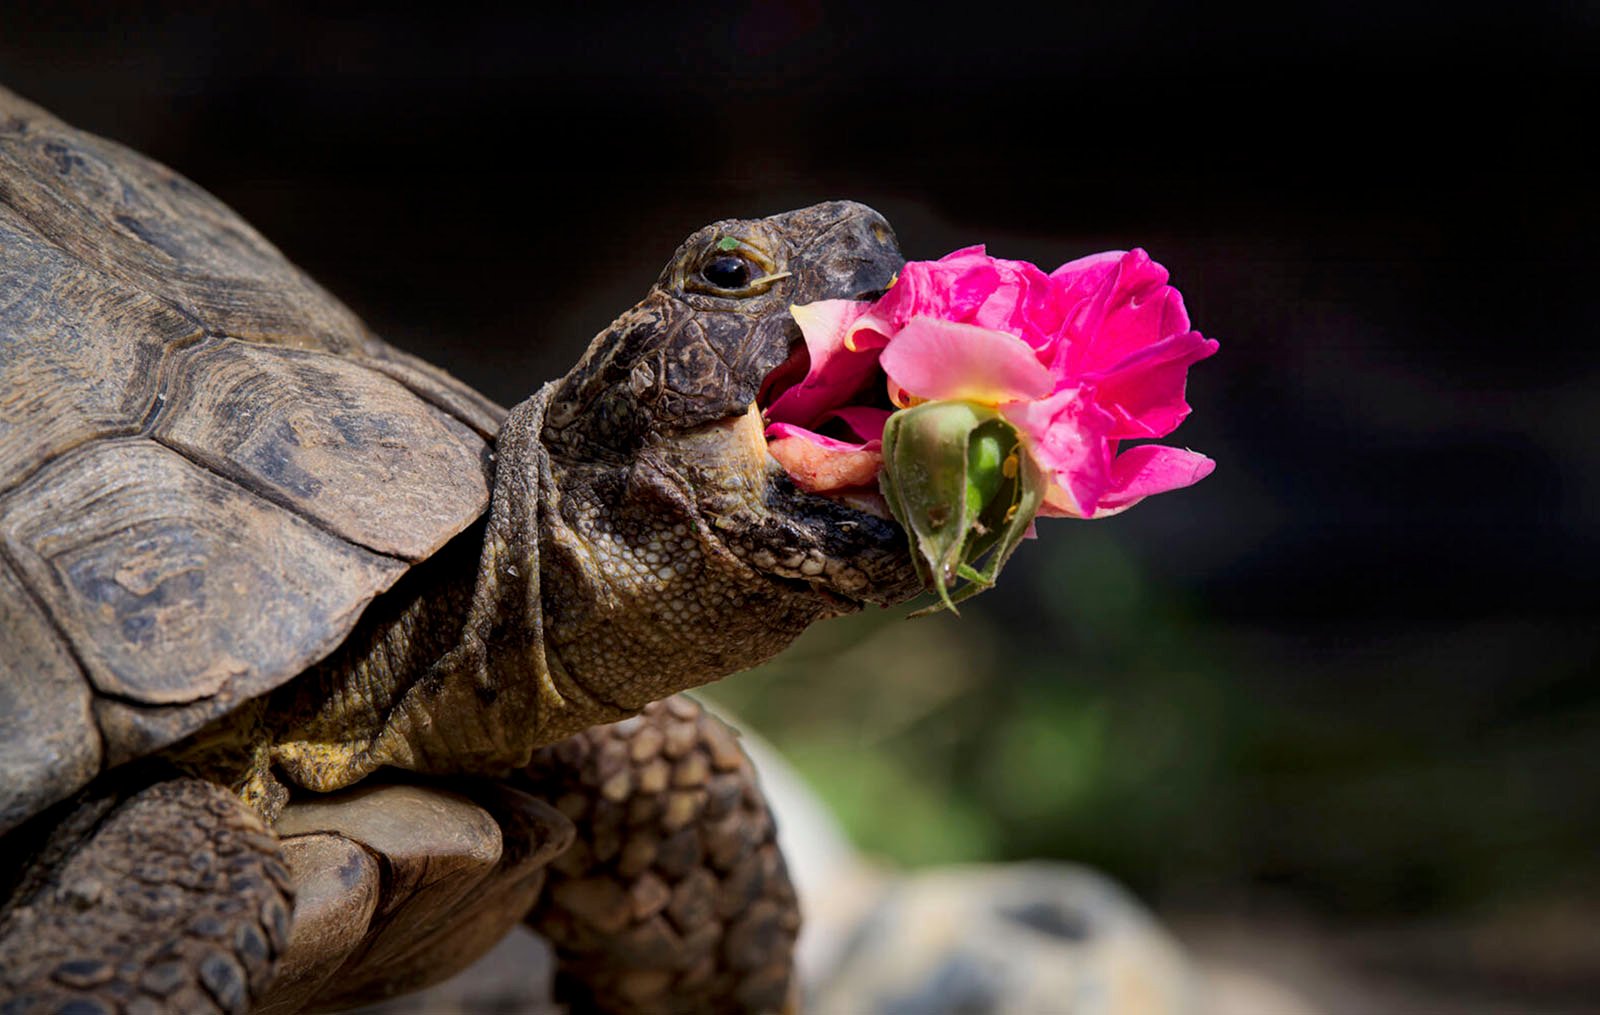 A tortoise nibbling on a bright pink flower, showcasing details of its textured shell and scaly head against a blurred natural background.